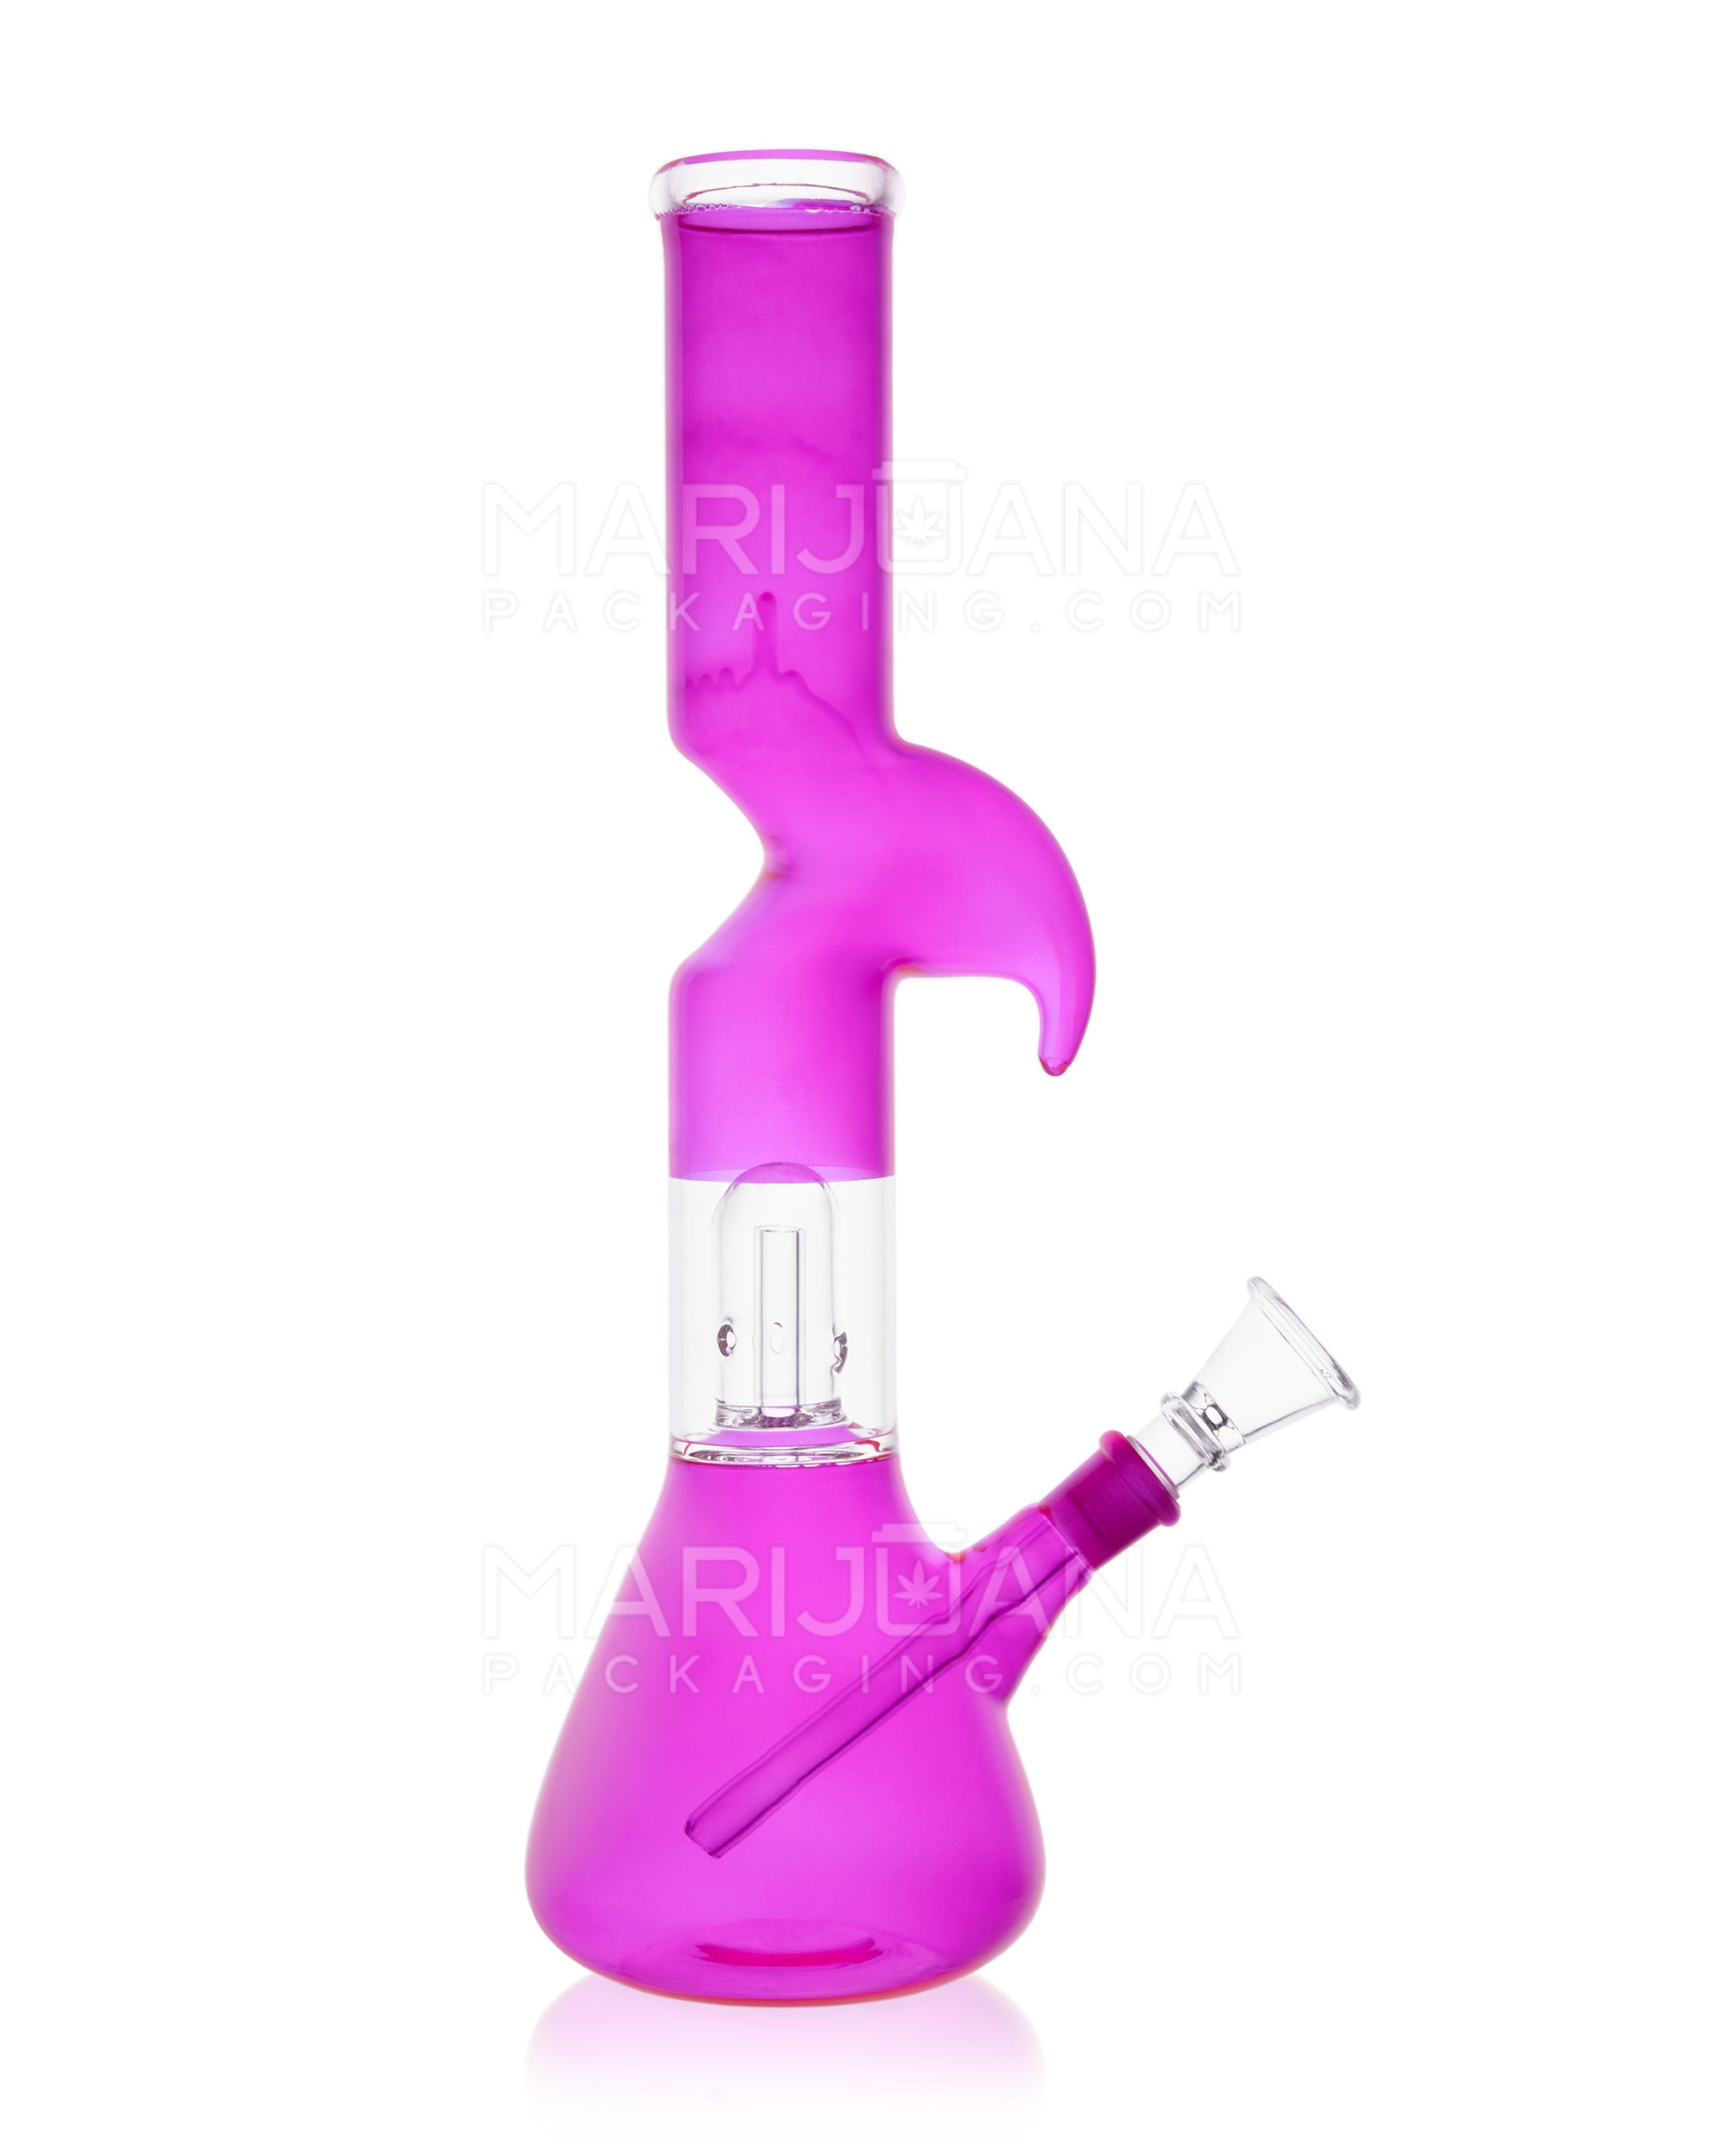 Z-Neck Glass Beaker Water Pipe w/ Ice Catcher | 12in Tall - 14mm Bowl - Assorted